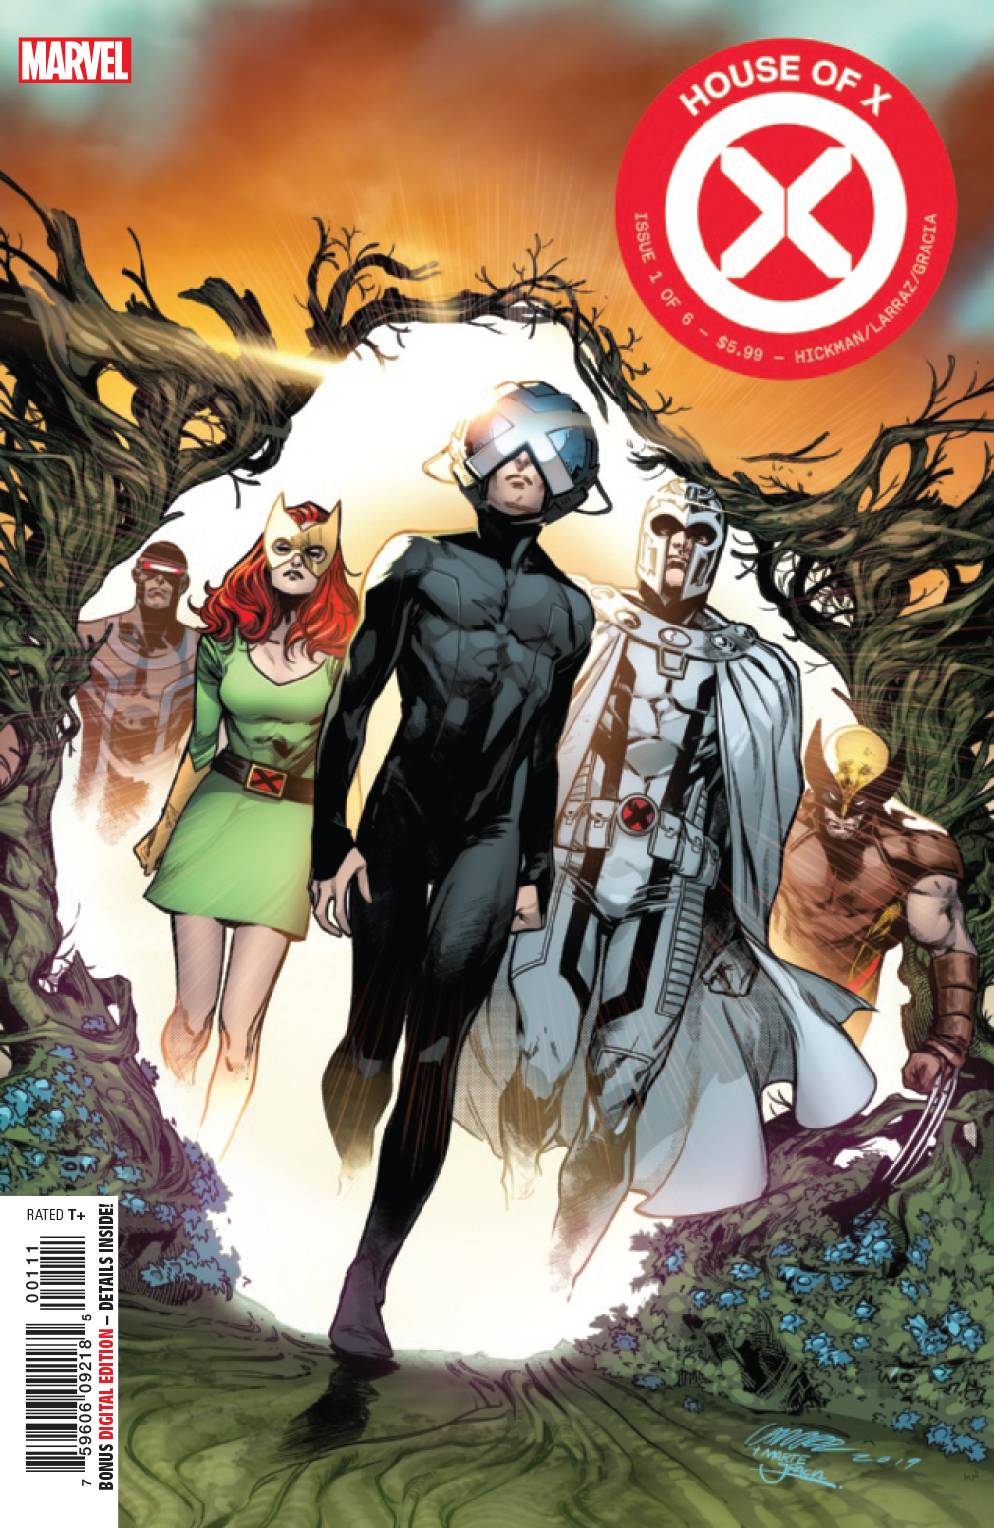 HOUSE OF X #1 (OF 6)